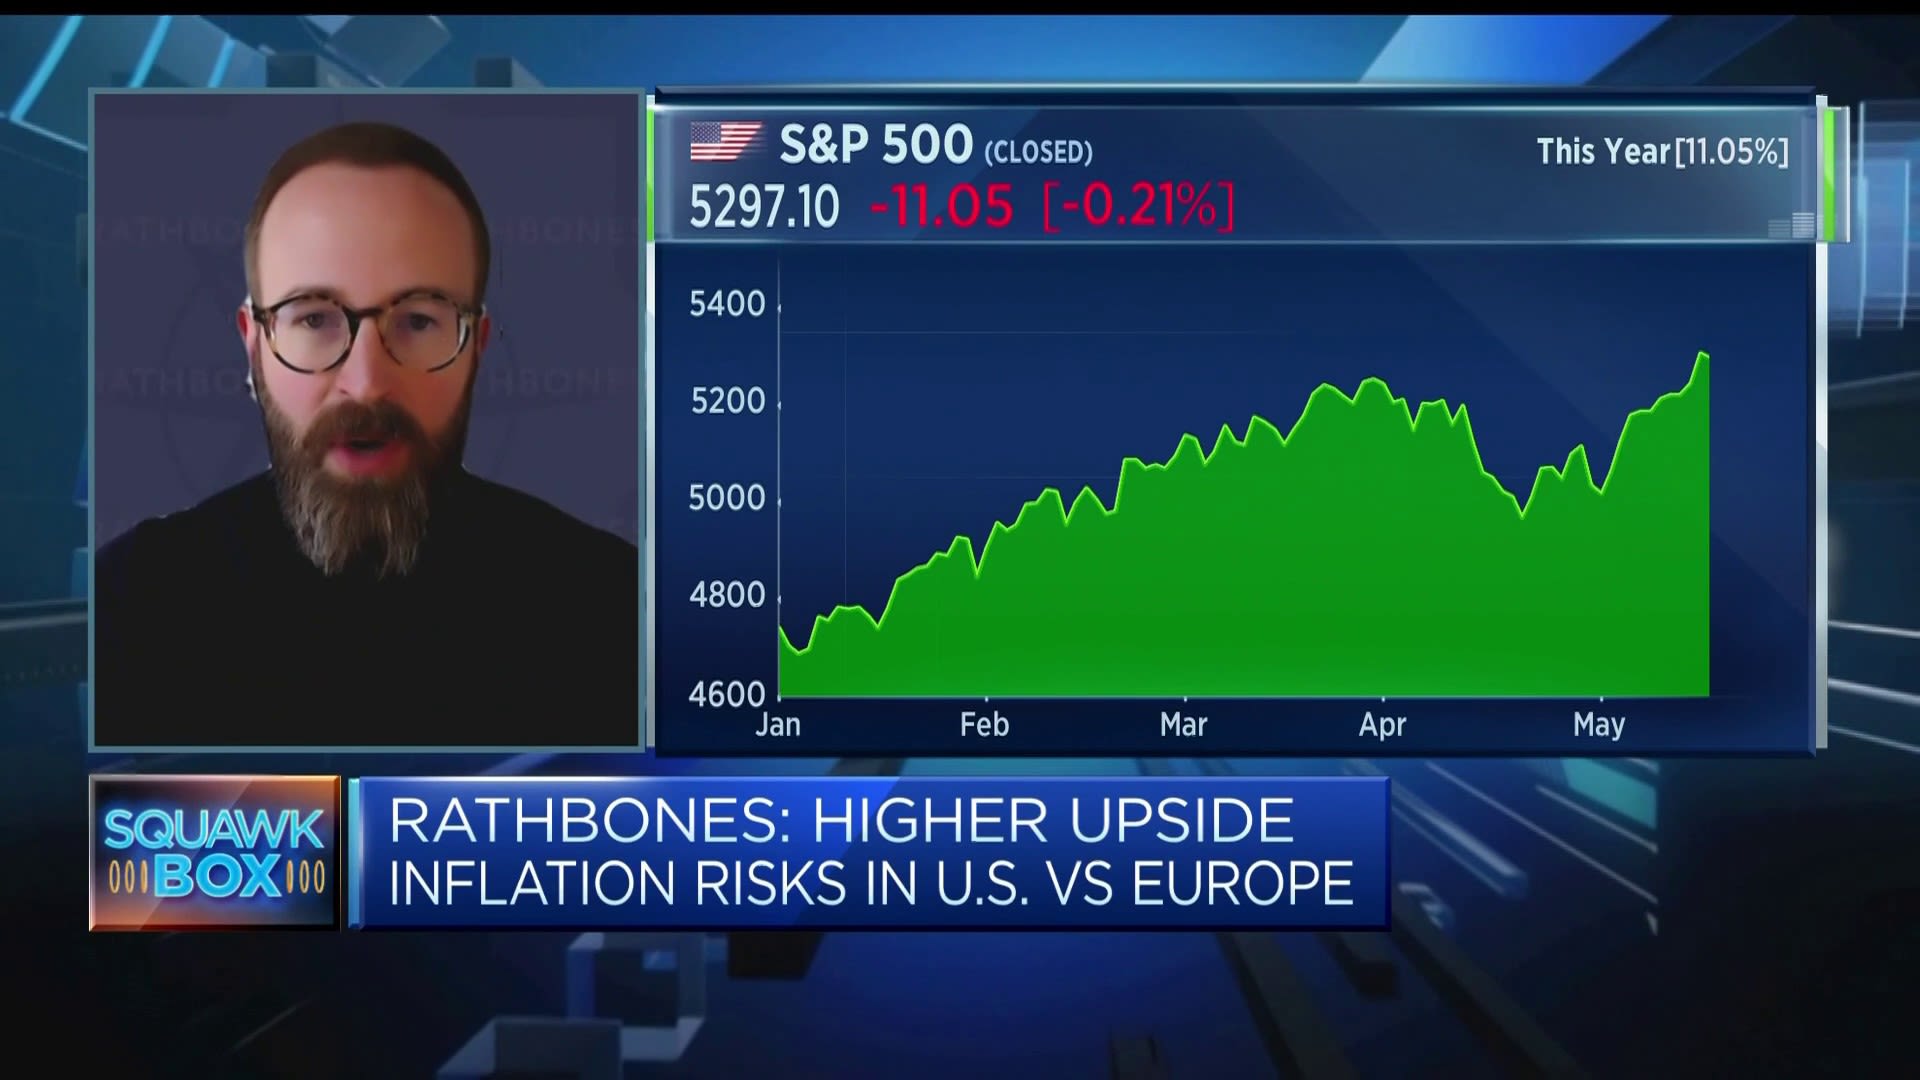 More upside risks to U.S. inflation in stark contrast to Europe, strategist says [Video]